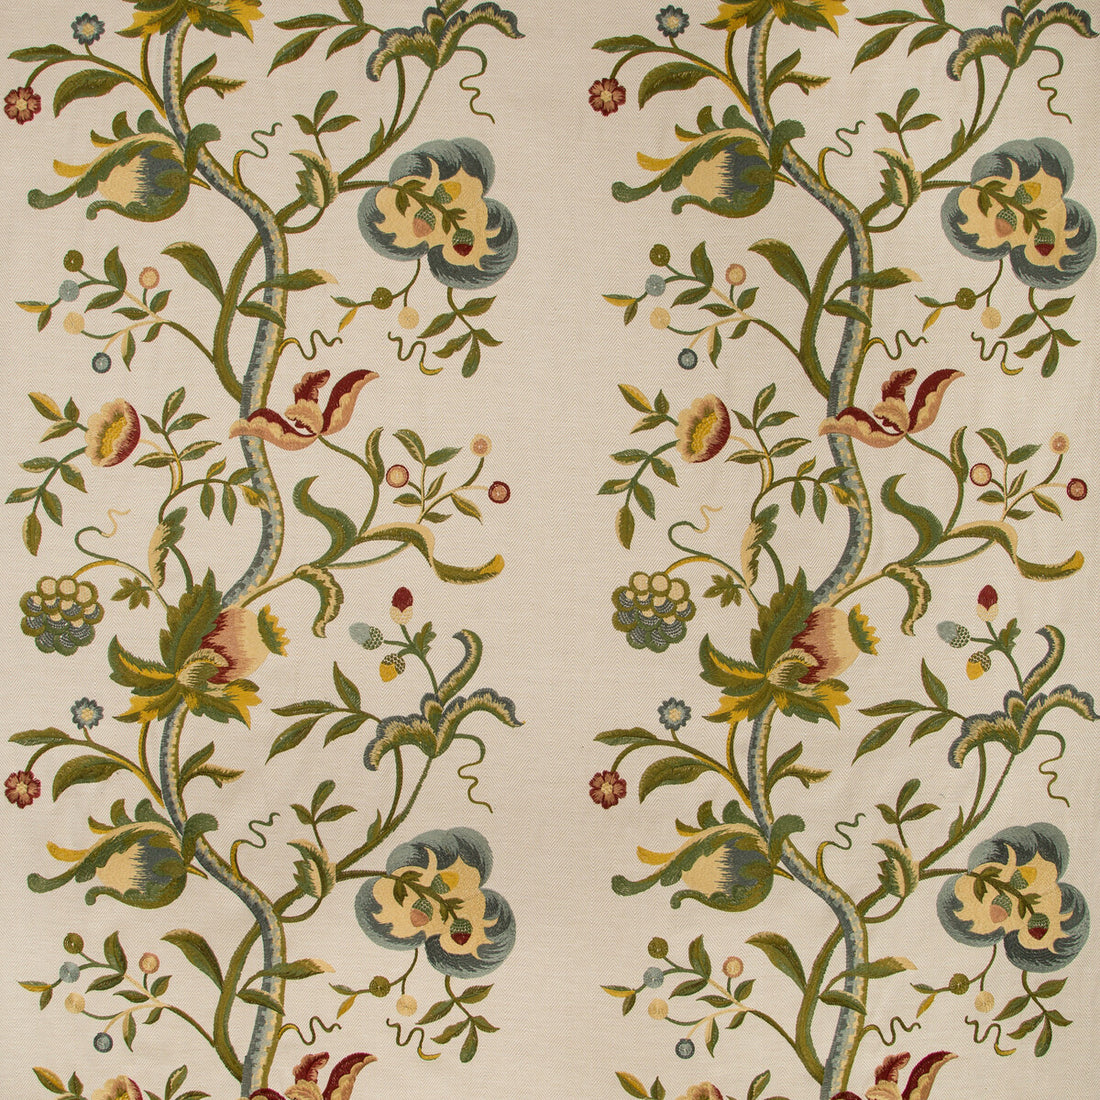 Dorton Embroidery fabric in multi color - pattern 2019107.349.0 - by Lee Jofa in the Manor House collection